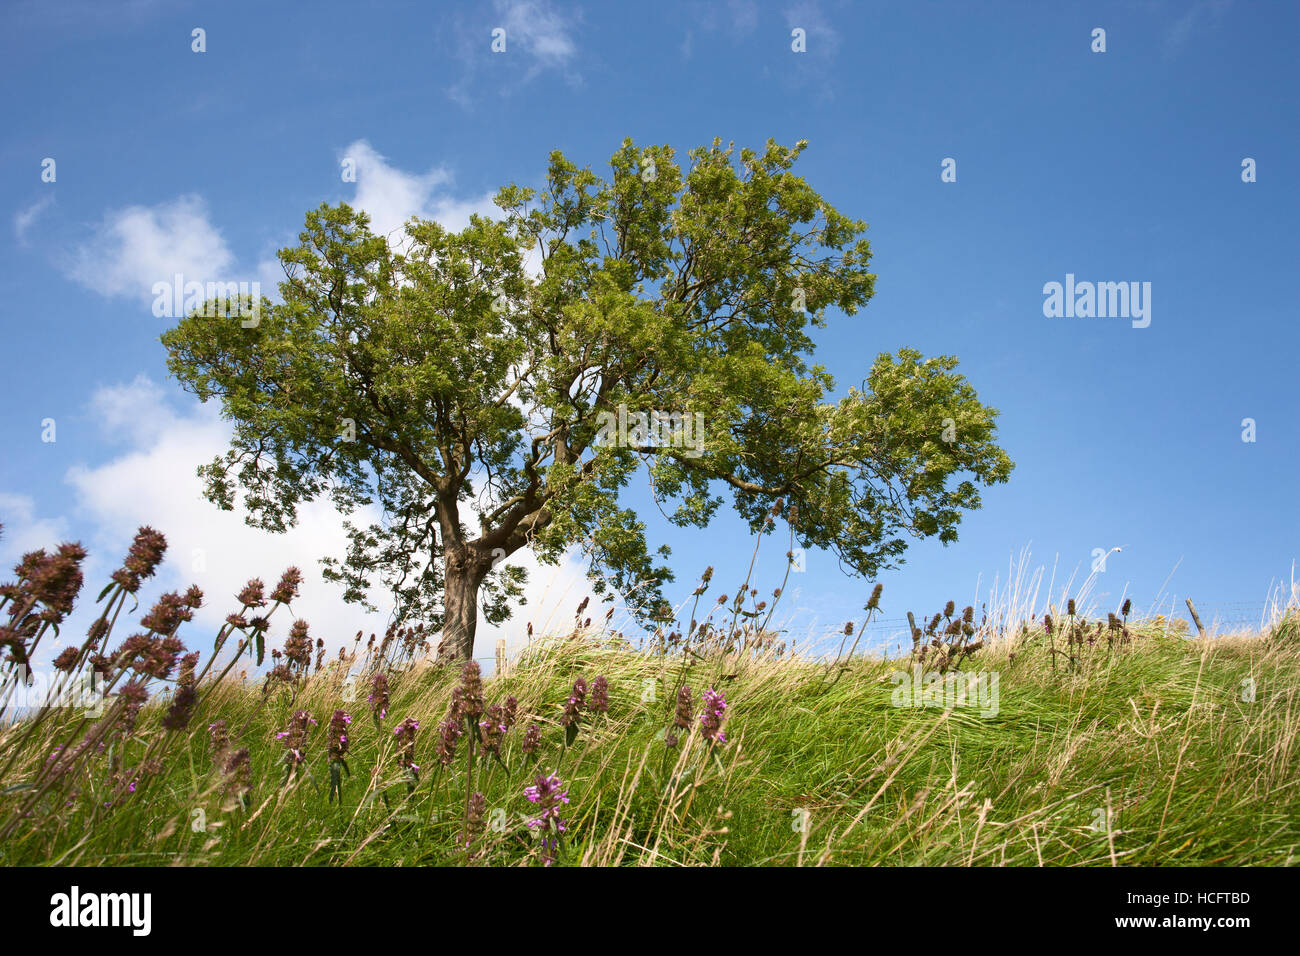 Lone tree on a summers day, Thruscross Reservoir, Washburn Valley, North Yorkshire Dales Stock Photo